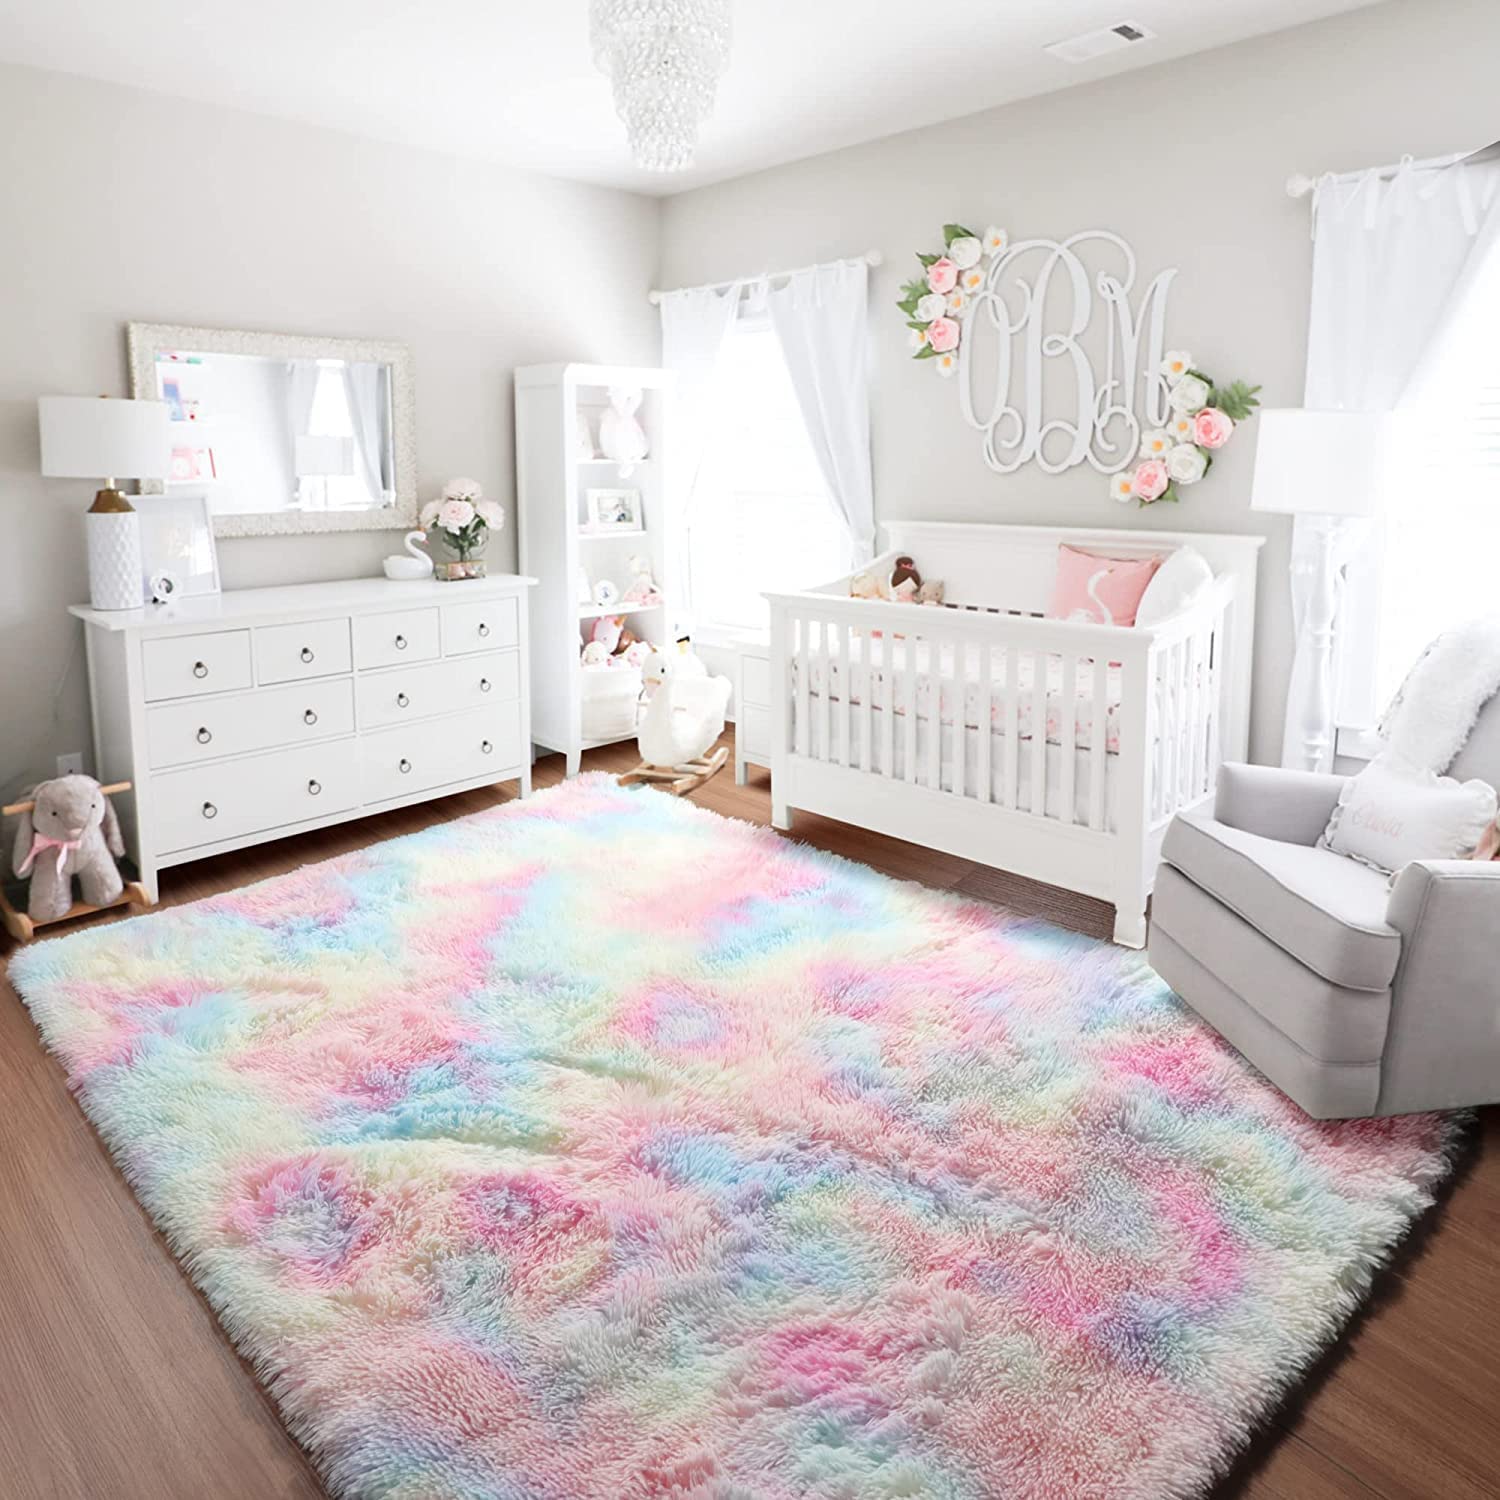 Junovo Soft Rainbow Area Rugs for Girls Room, Fluffy Colorful Rugs Cute Floor Carpets Shaggy Playing Mat for Kids Baby Girls Bedroom Nursery Room, 4'x6',Rainbow - image 3 of 8